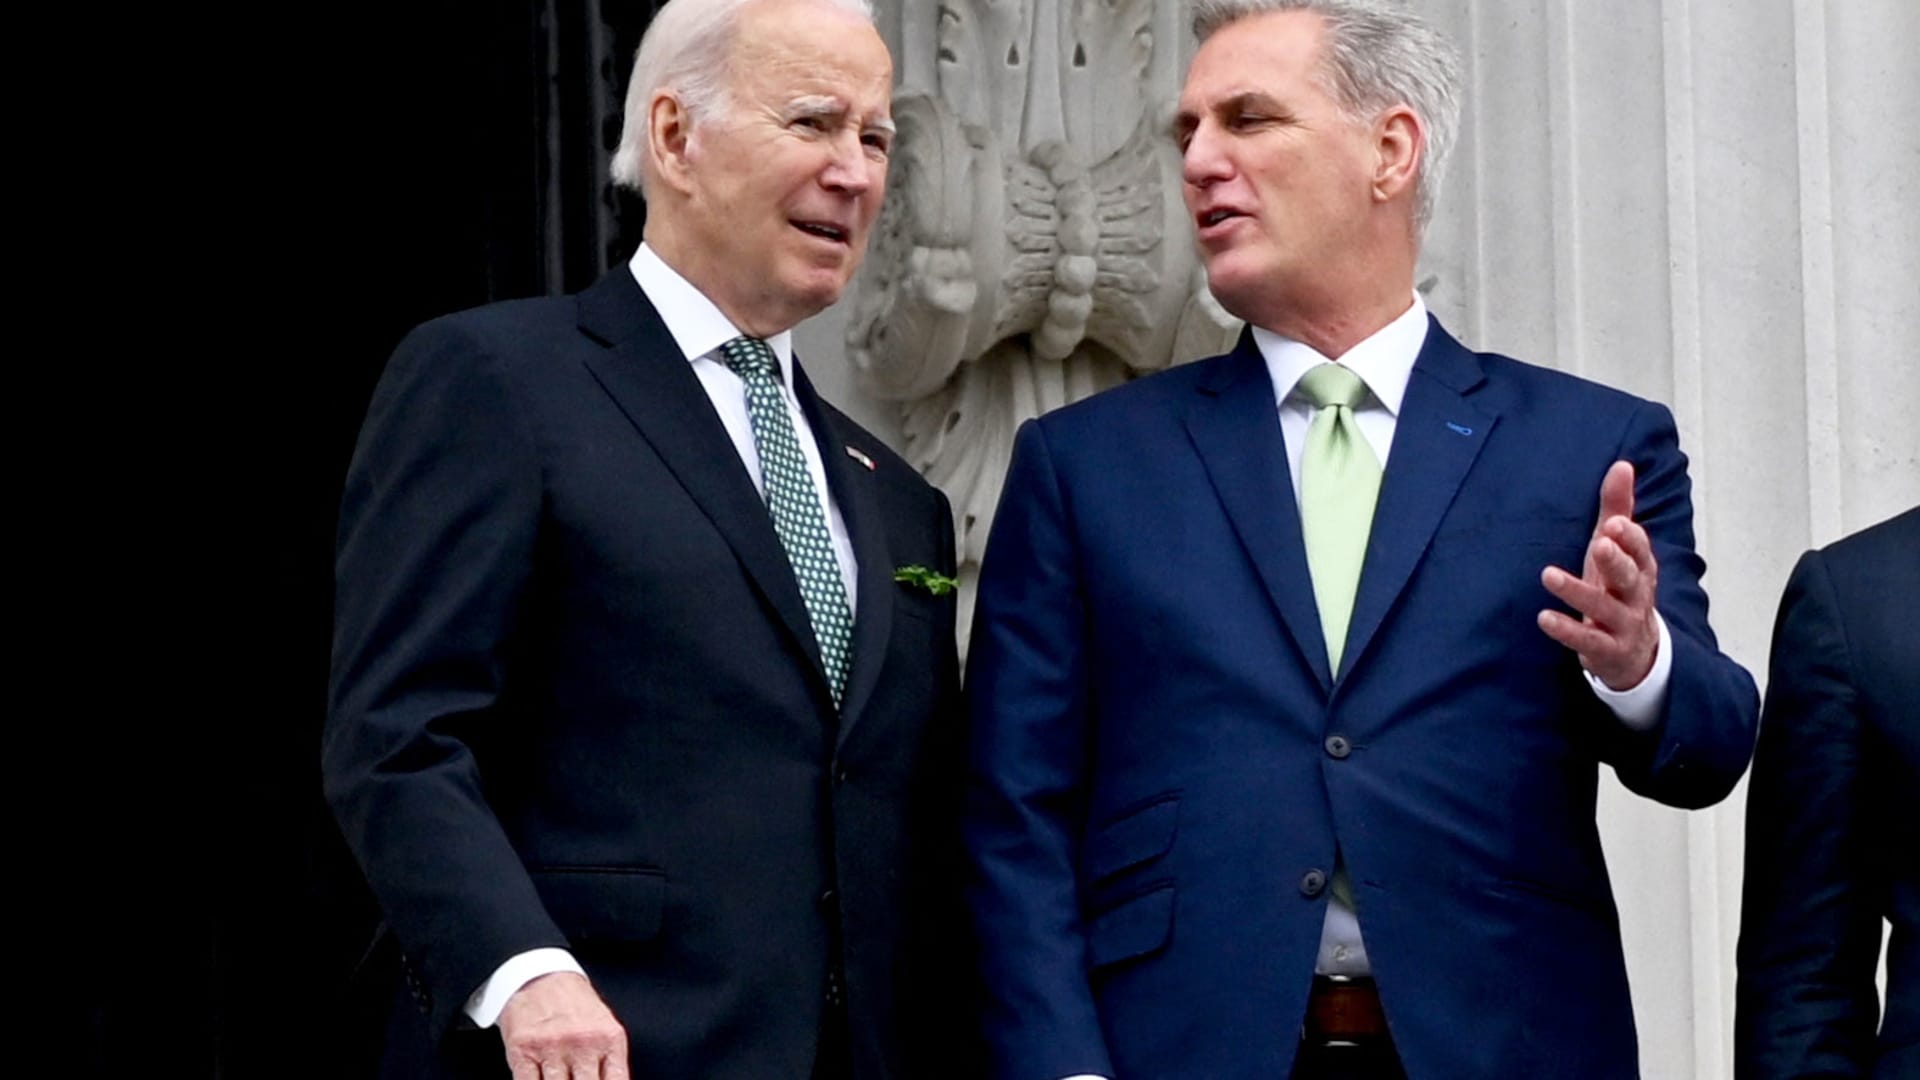 (L-R) US President Joe Biden, Speaker of the House Kevin McCarthy, Republican of California, depart after the annual Friends of Ireland luncheon on St. Patrick's Day at the US Capitol in Washington, DC, on March 17, 2023.